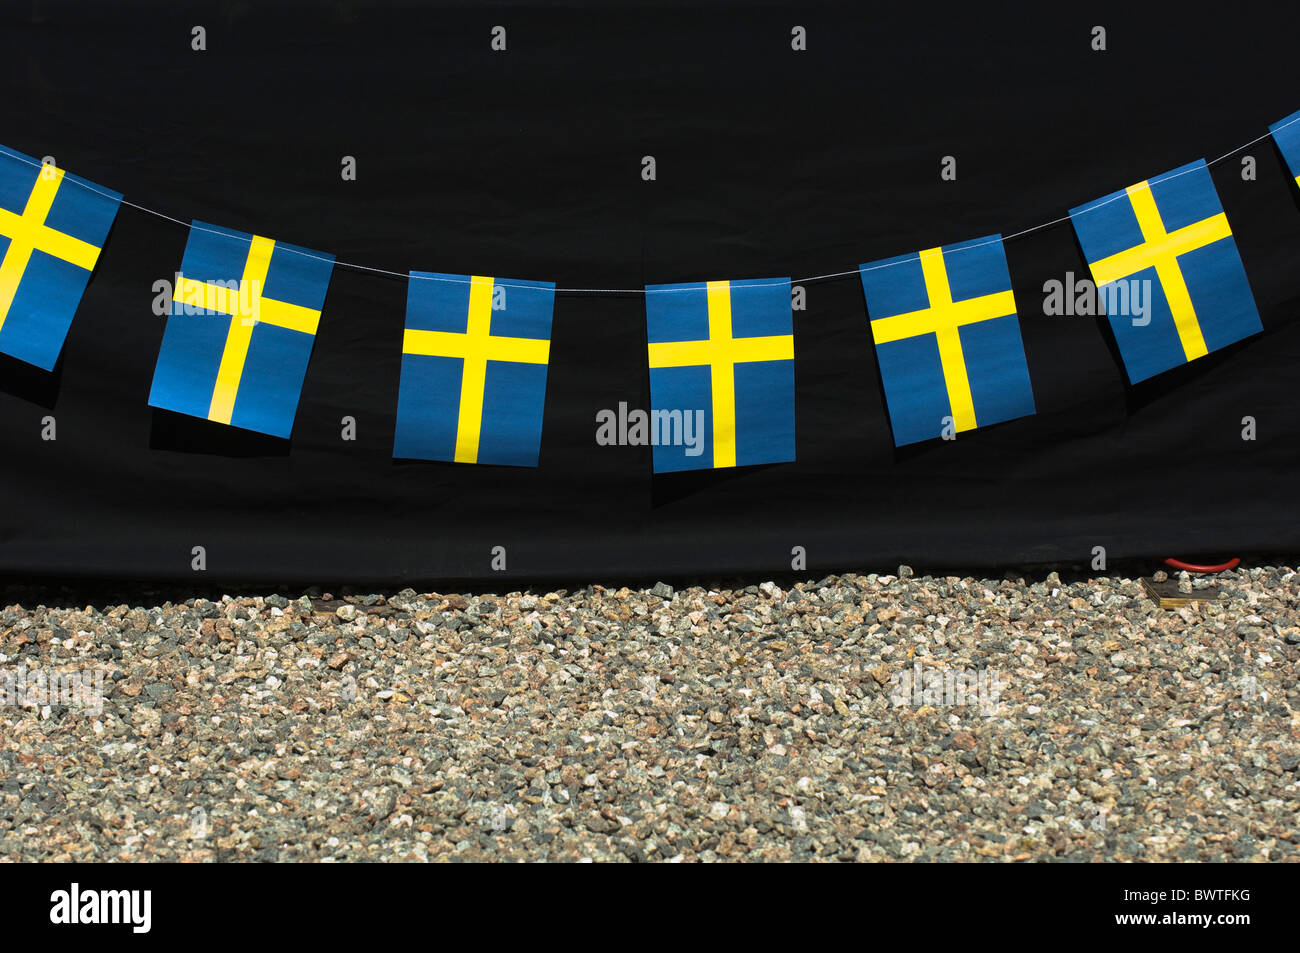 Swedish flags in a row Stock Photo